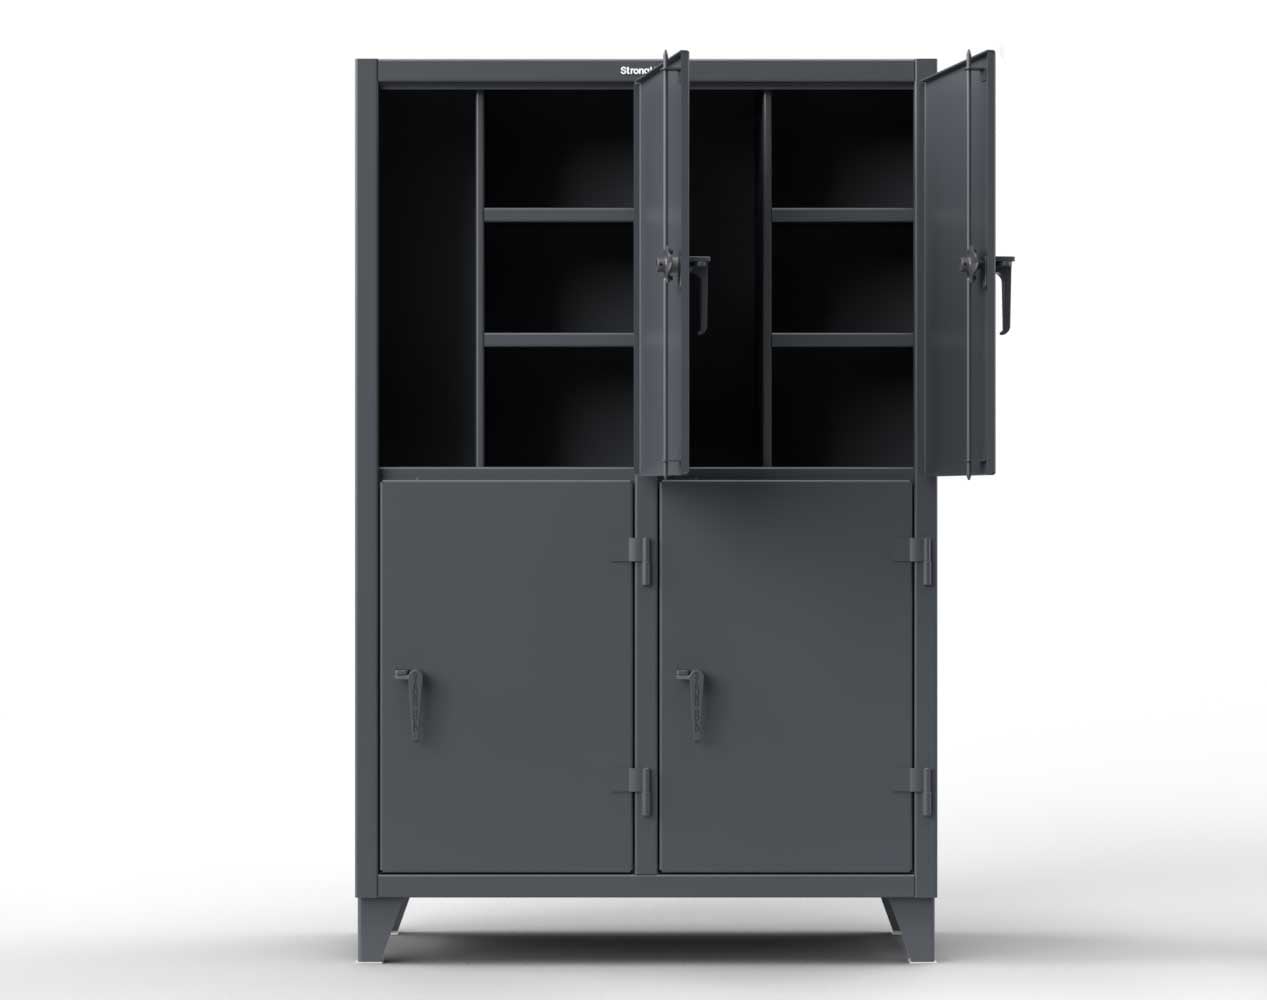 Extreme Duty 12 GA Double-Tier Locker with 8 Compartments, 16 Shelves, Coat Hooks - 98 in. W x 24in. D x 78 in. H